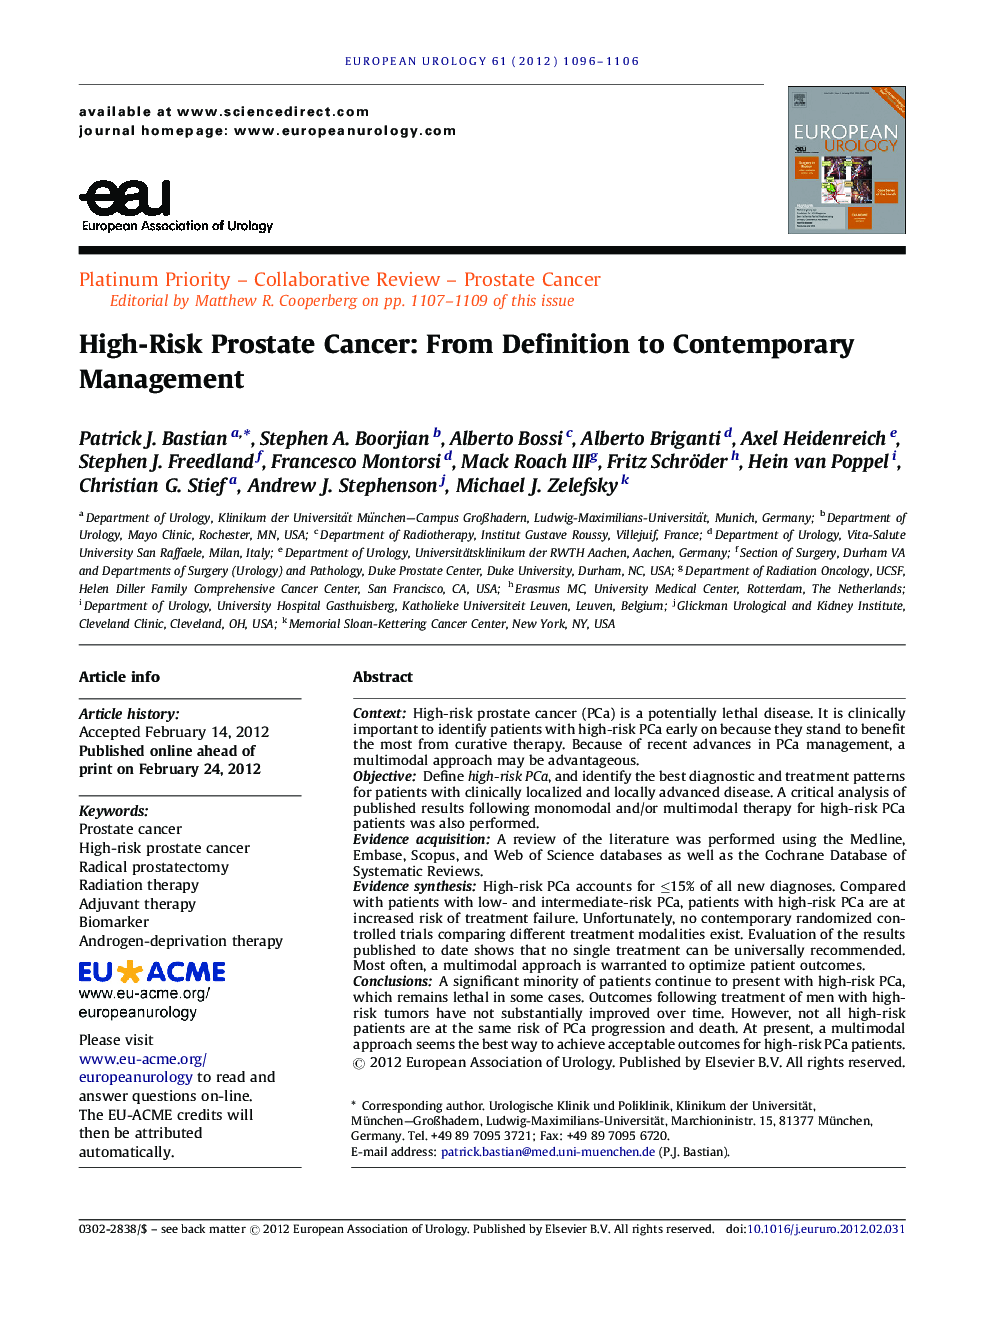 High-Risk Prostate Cancer: From Definition to Contemporary Management 